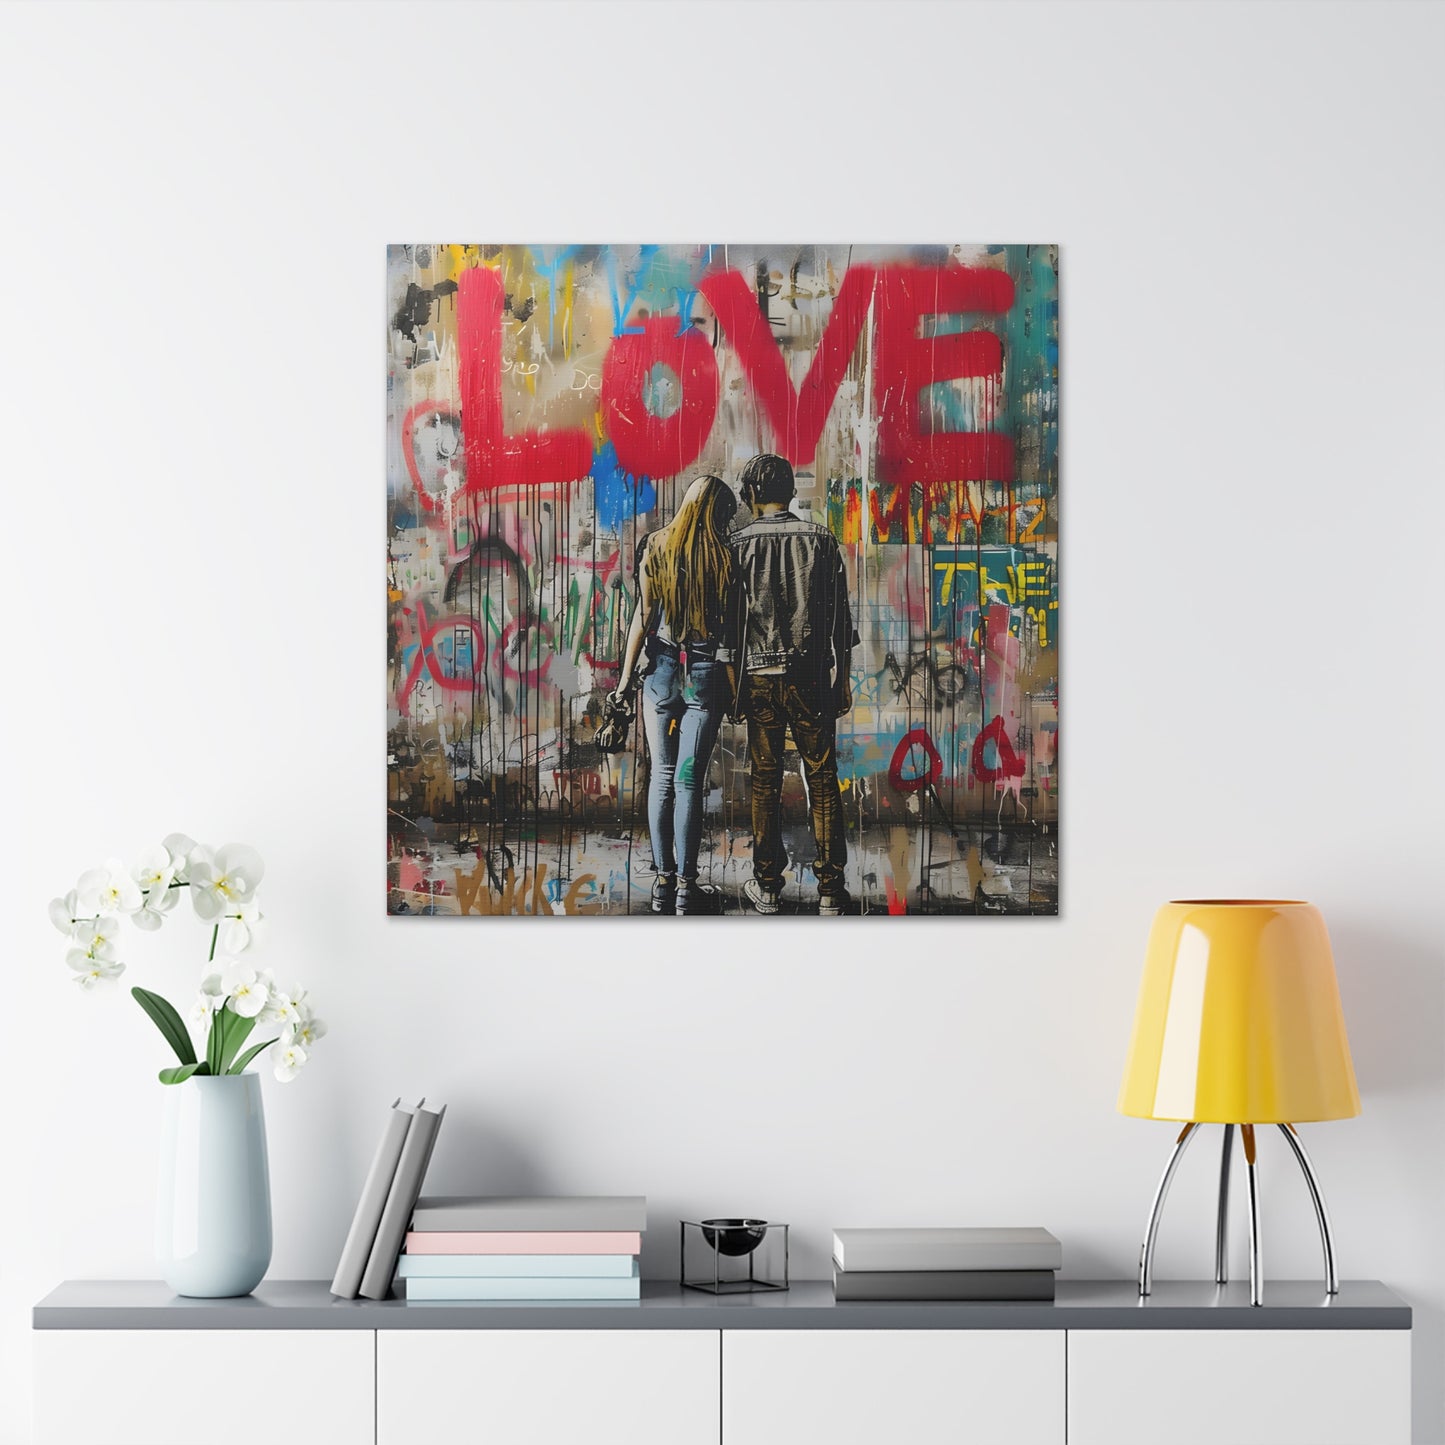 Nico Verruci. Together Against the Canvas of Time. Exclusive Canvas Print